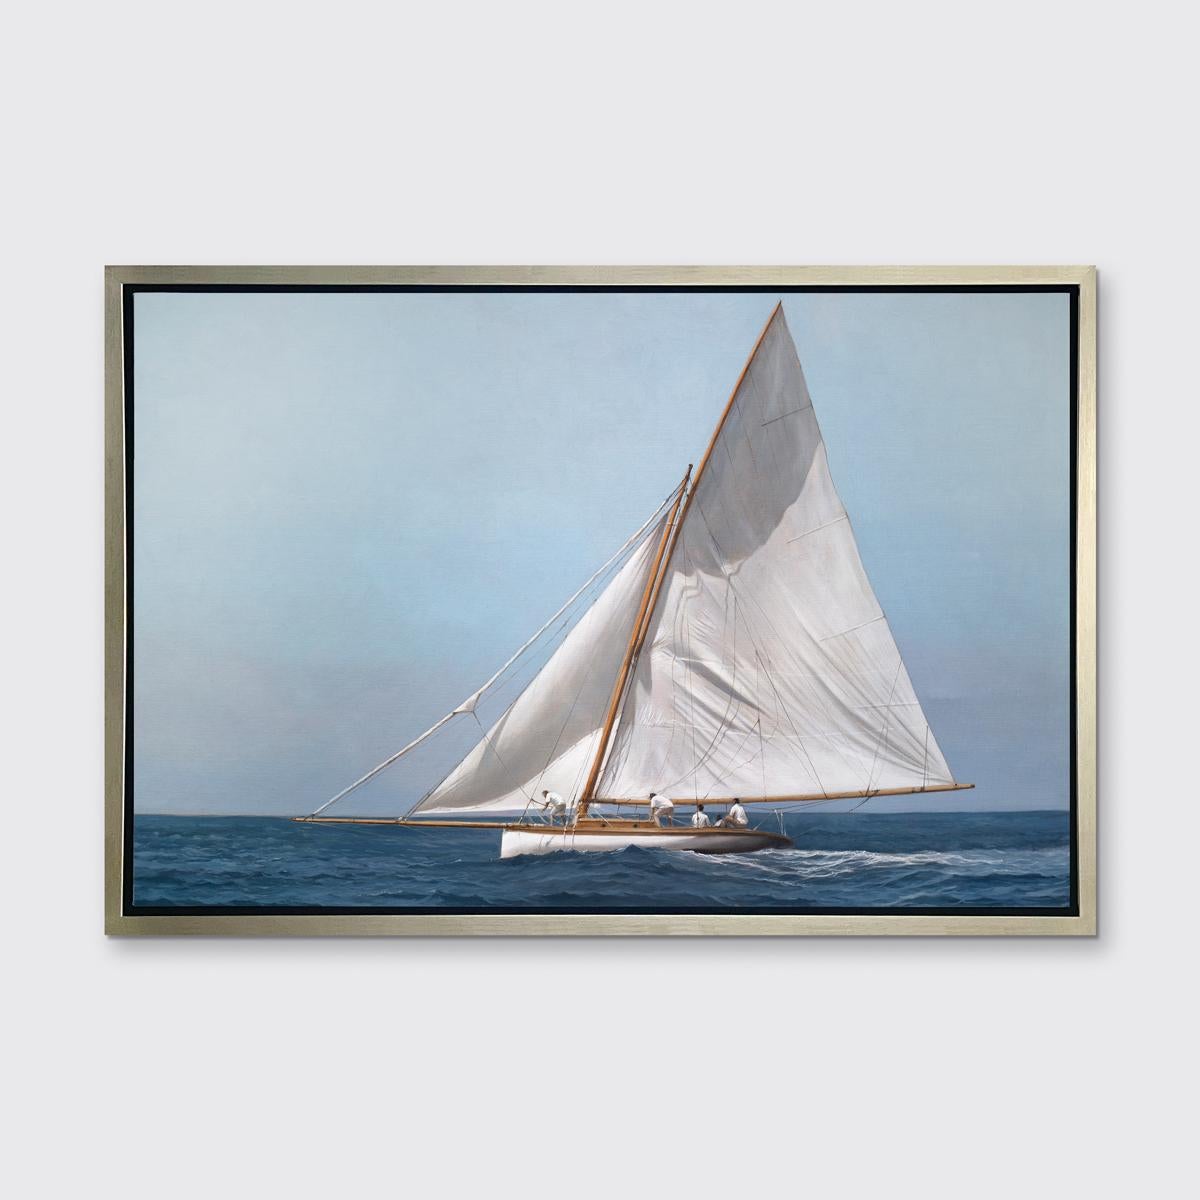 This realistic coastal limited edition print by Michel Brosseau features a light blue and white palette and captures a large sailboat as it sails through the ocean, carrying four passengers. 

This Limited Edition giclee print is an edition size of